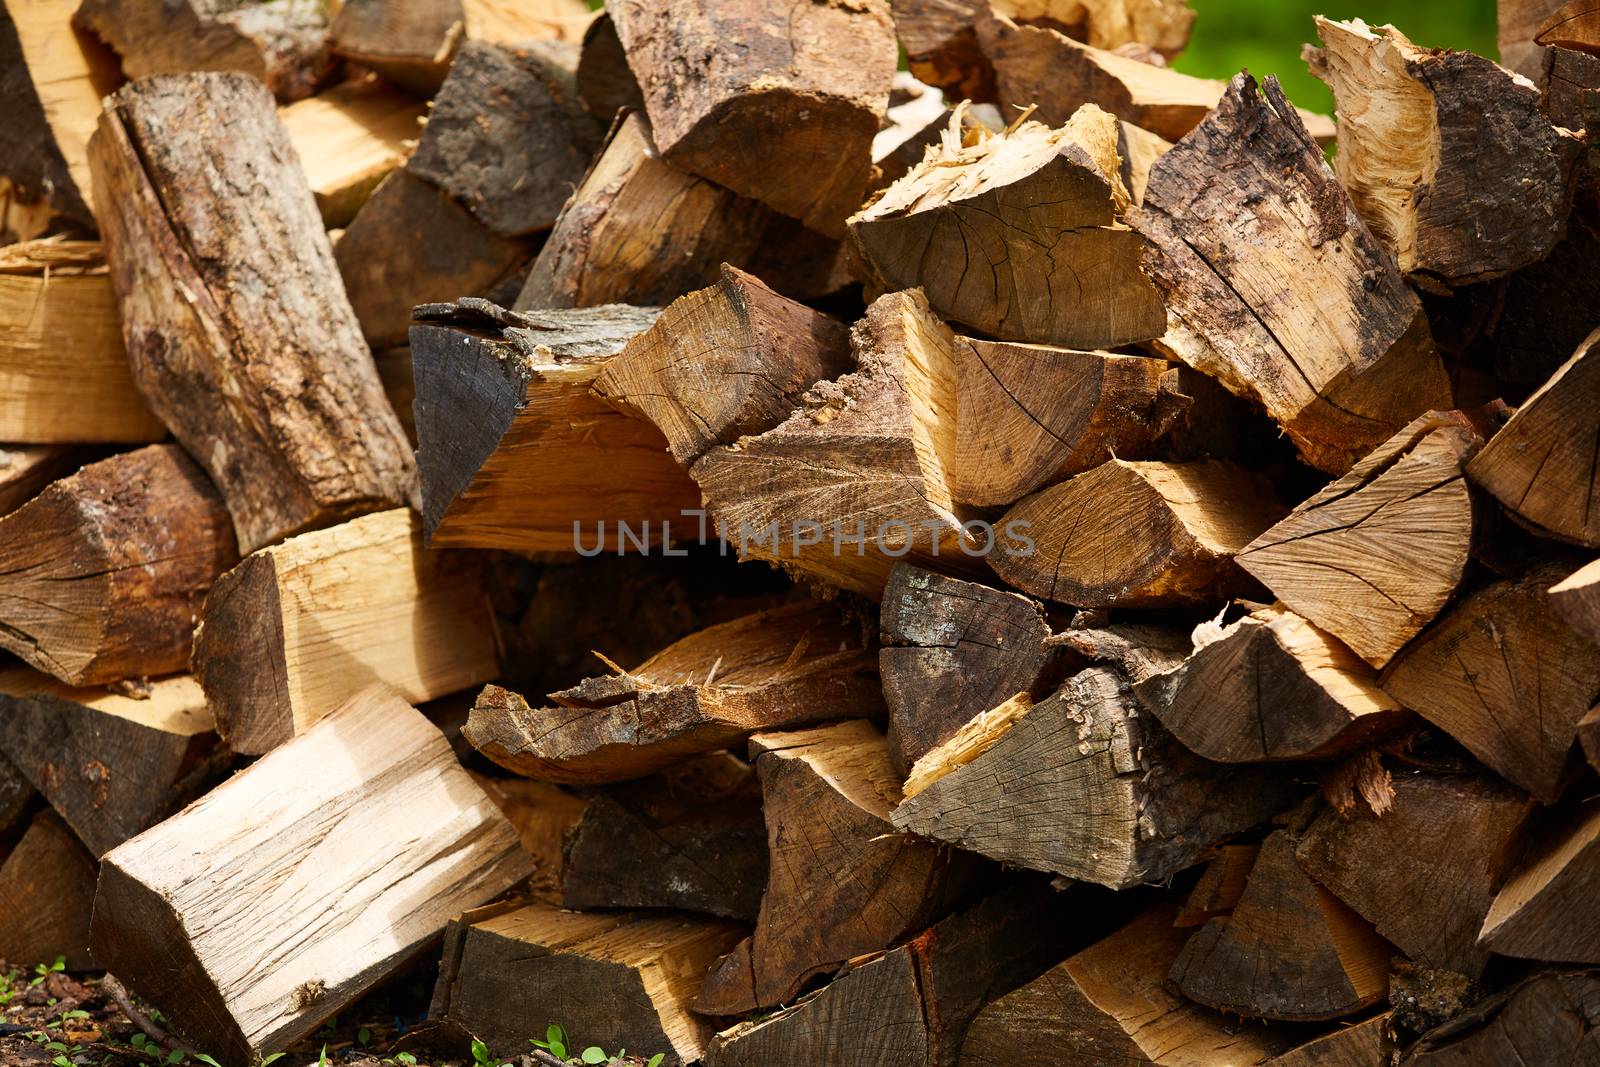 Firewood. Dry firewood in a pile for furnace kindling